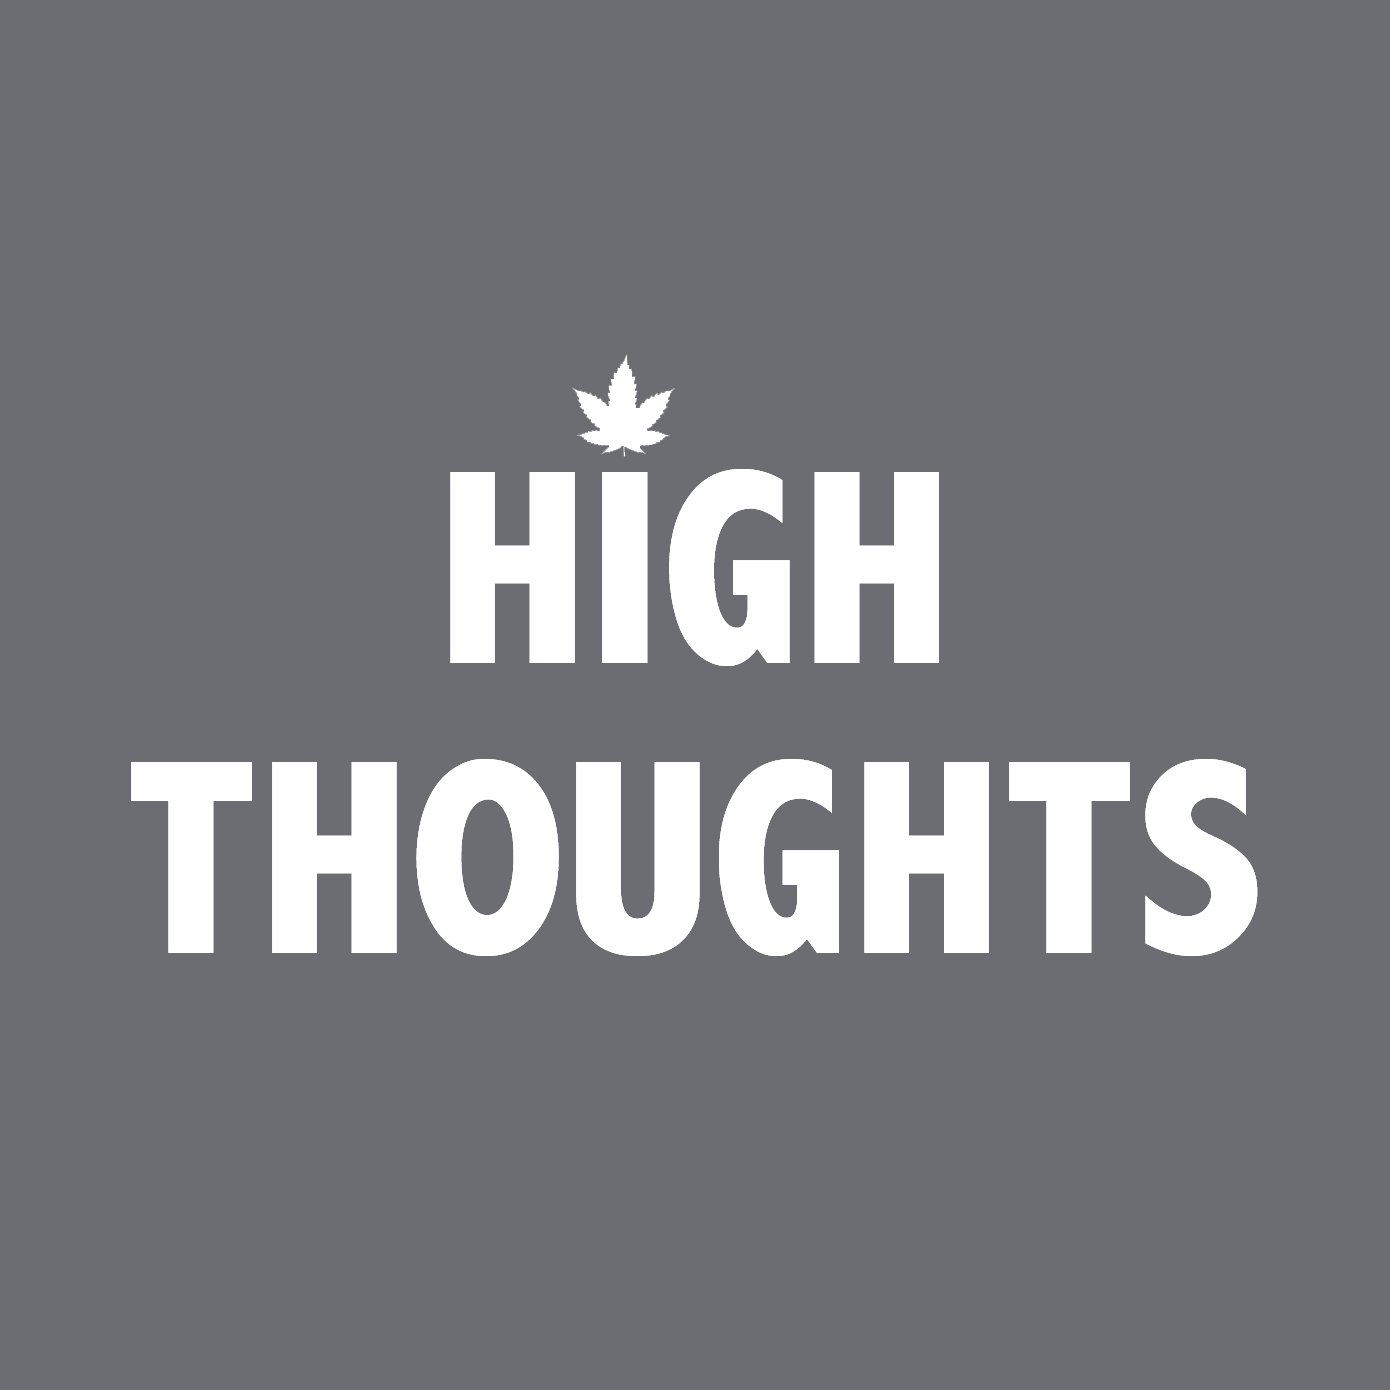 Cannabis content curator 🍁🍁 Funny, deep and meaningful #highthoughts and #weedmemes 💬 Want to get featured? Submit your high thoughts to our site